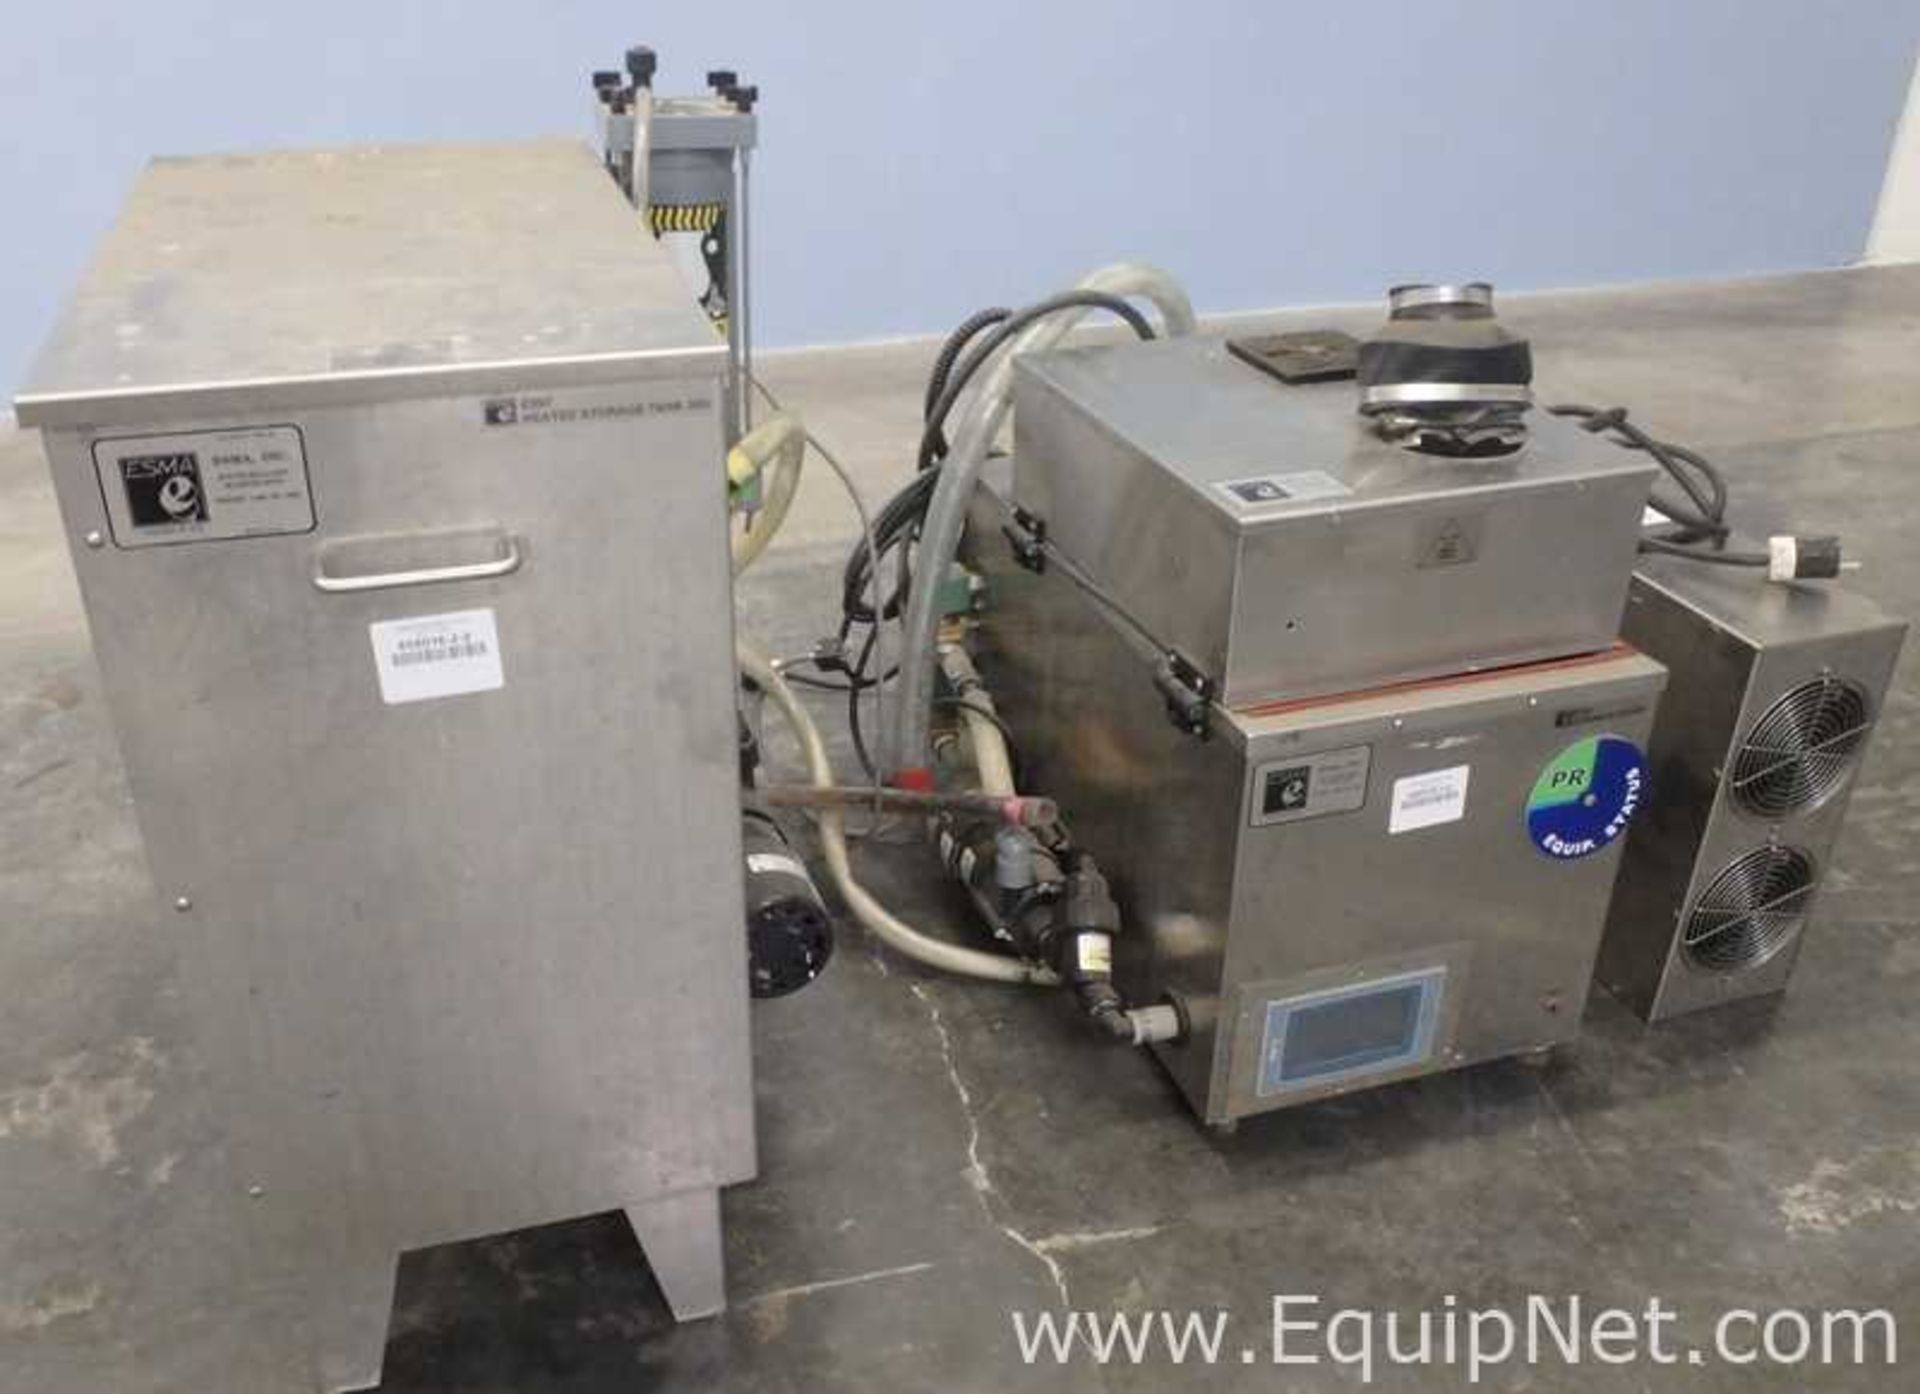 ESMA Inc. E700 Ultrasonic Cleaning System with E997 30Gal Heated Storage Tank - Image 15 of 38